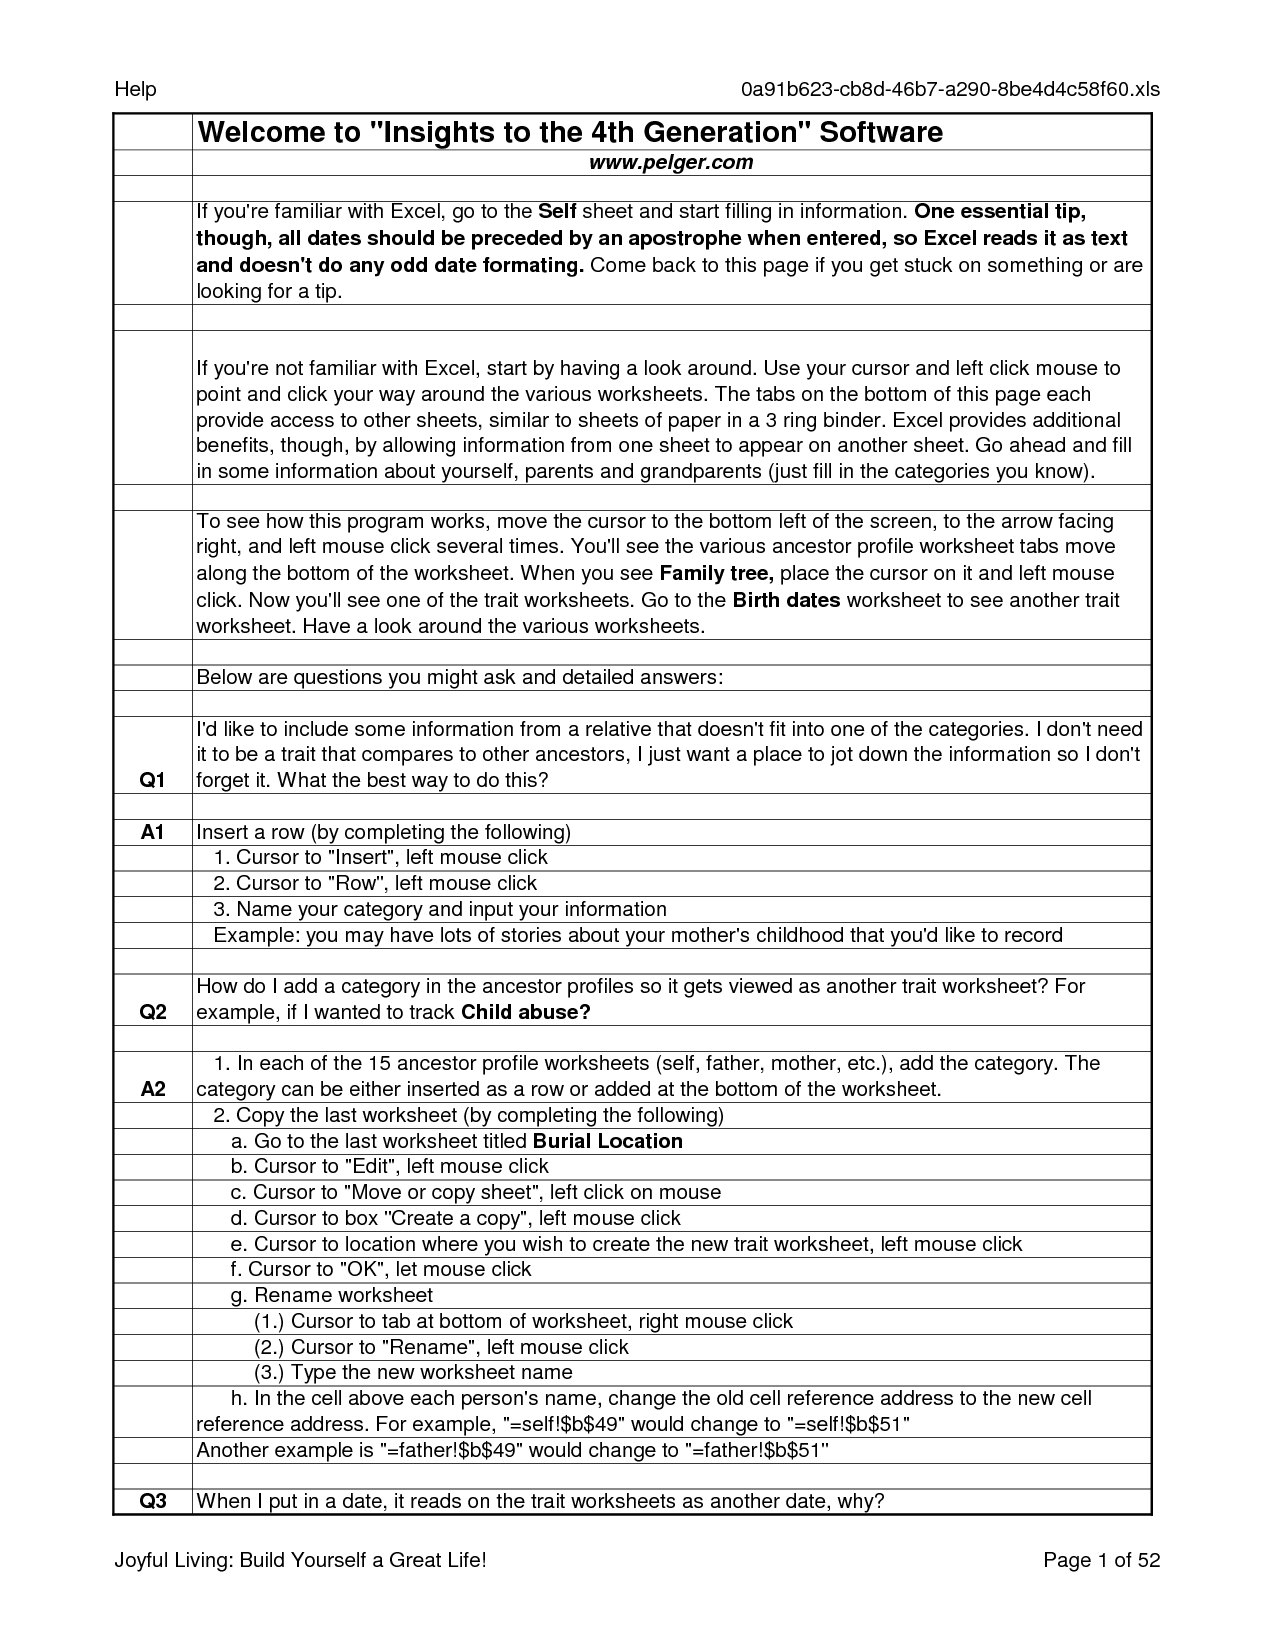 marriage-therapy-worksheets